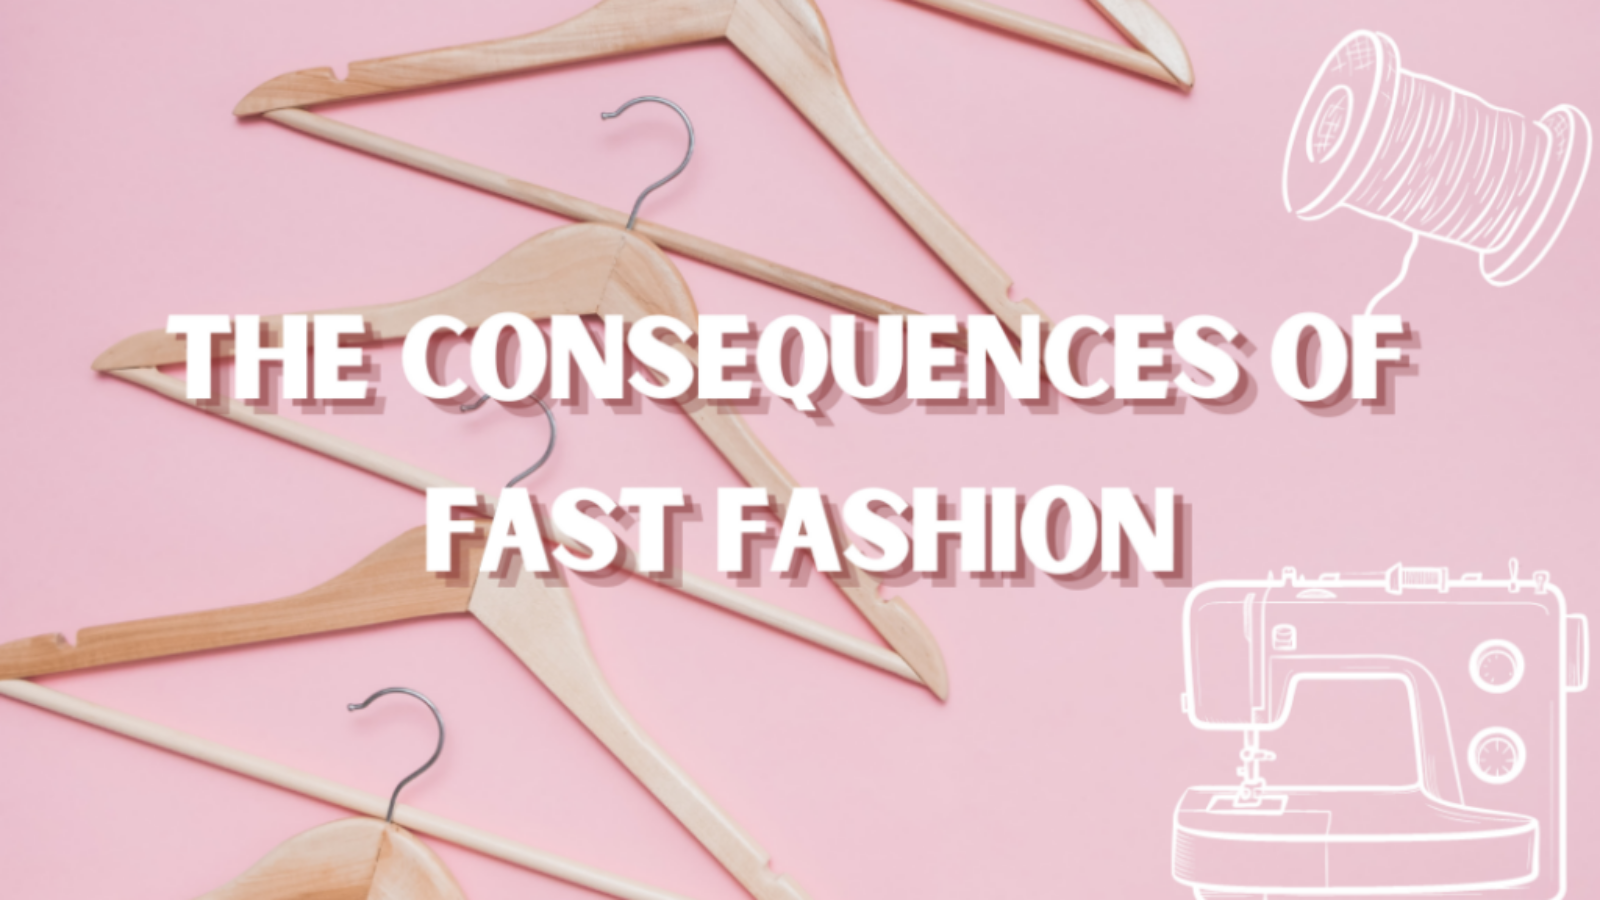 Blog header reading, 'The Consequences of Fast Fashion' over a pink background with clothes hangers and sewing machine